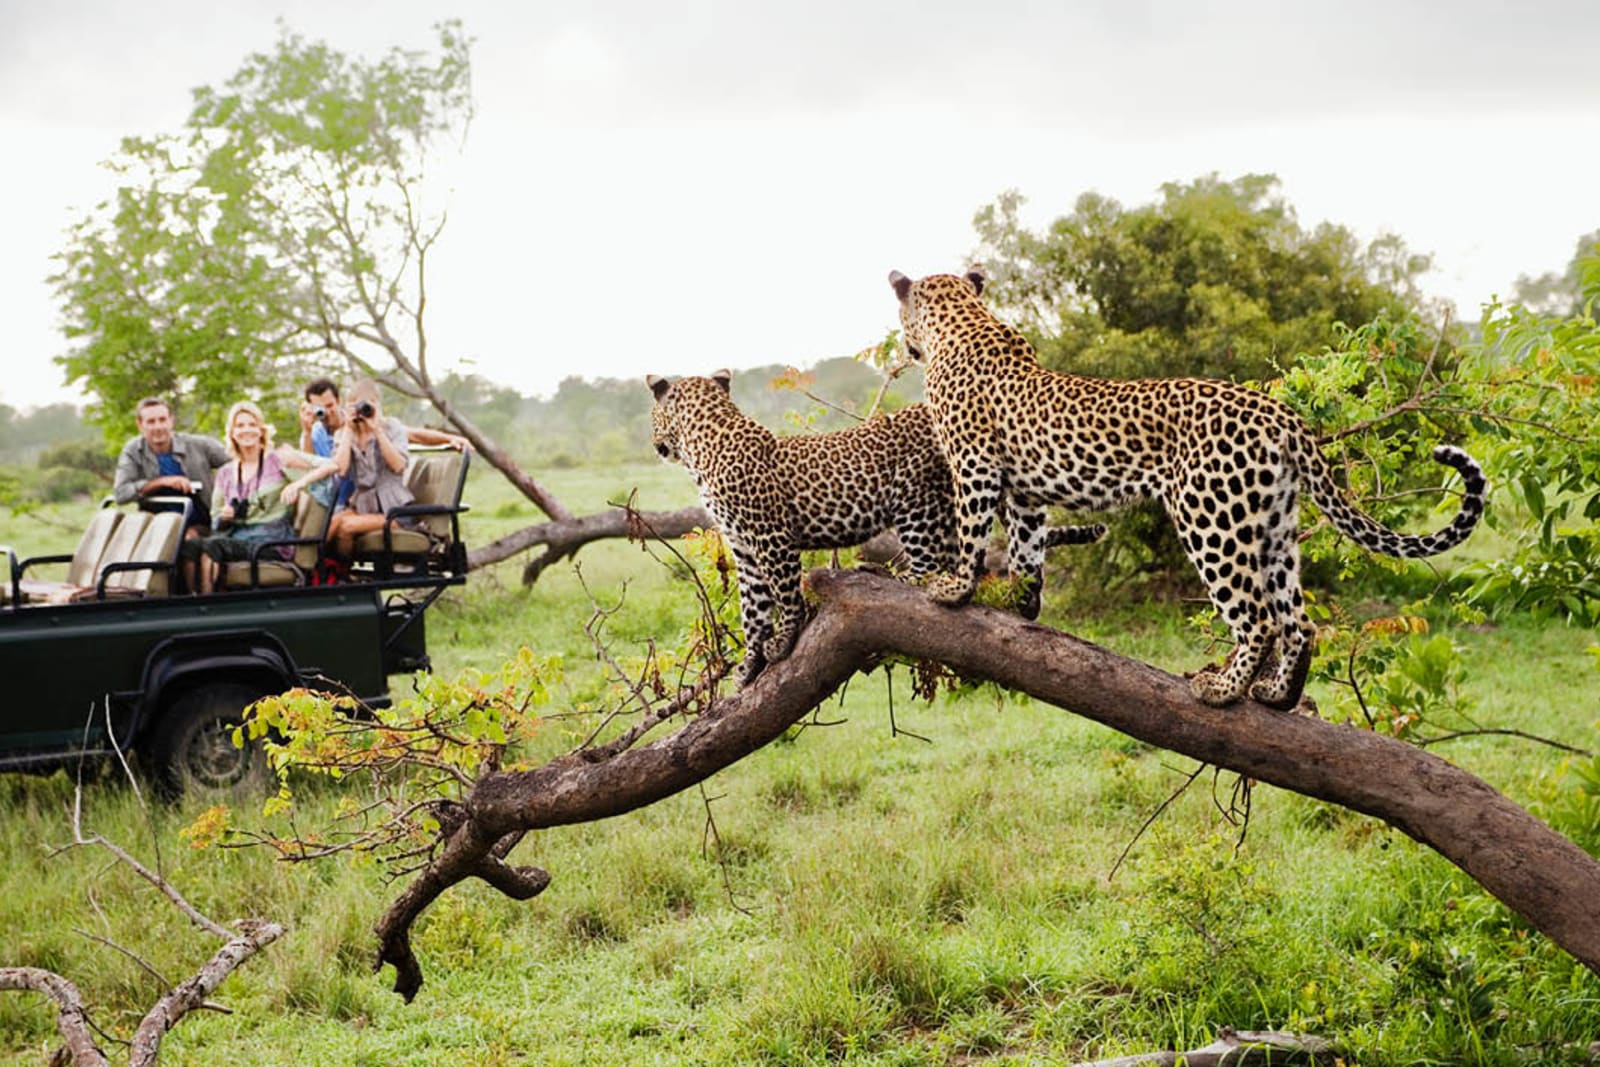 A group of people viewing leopards while on a safari in Kruger National Park, South Africa